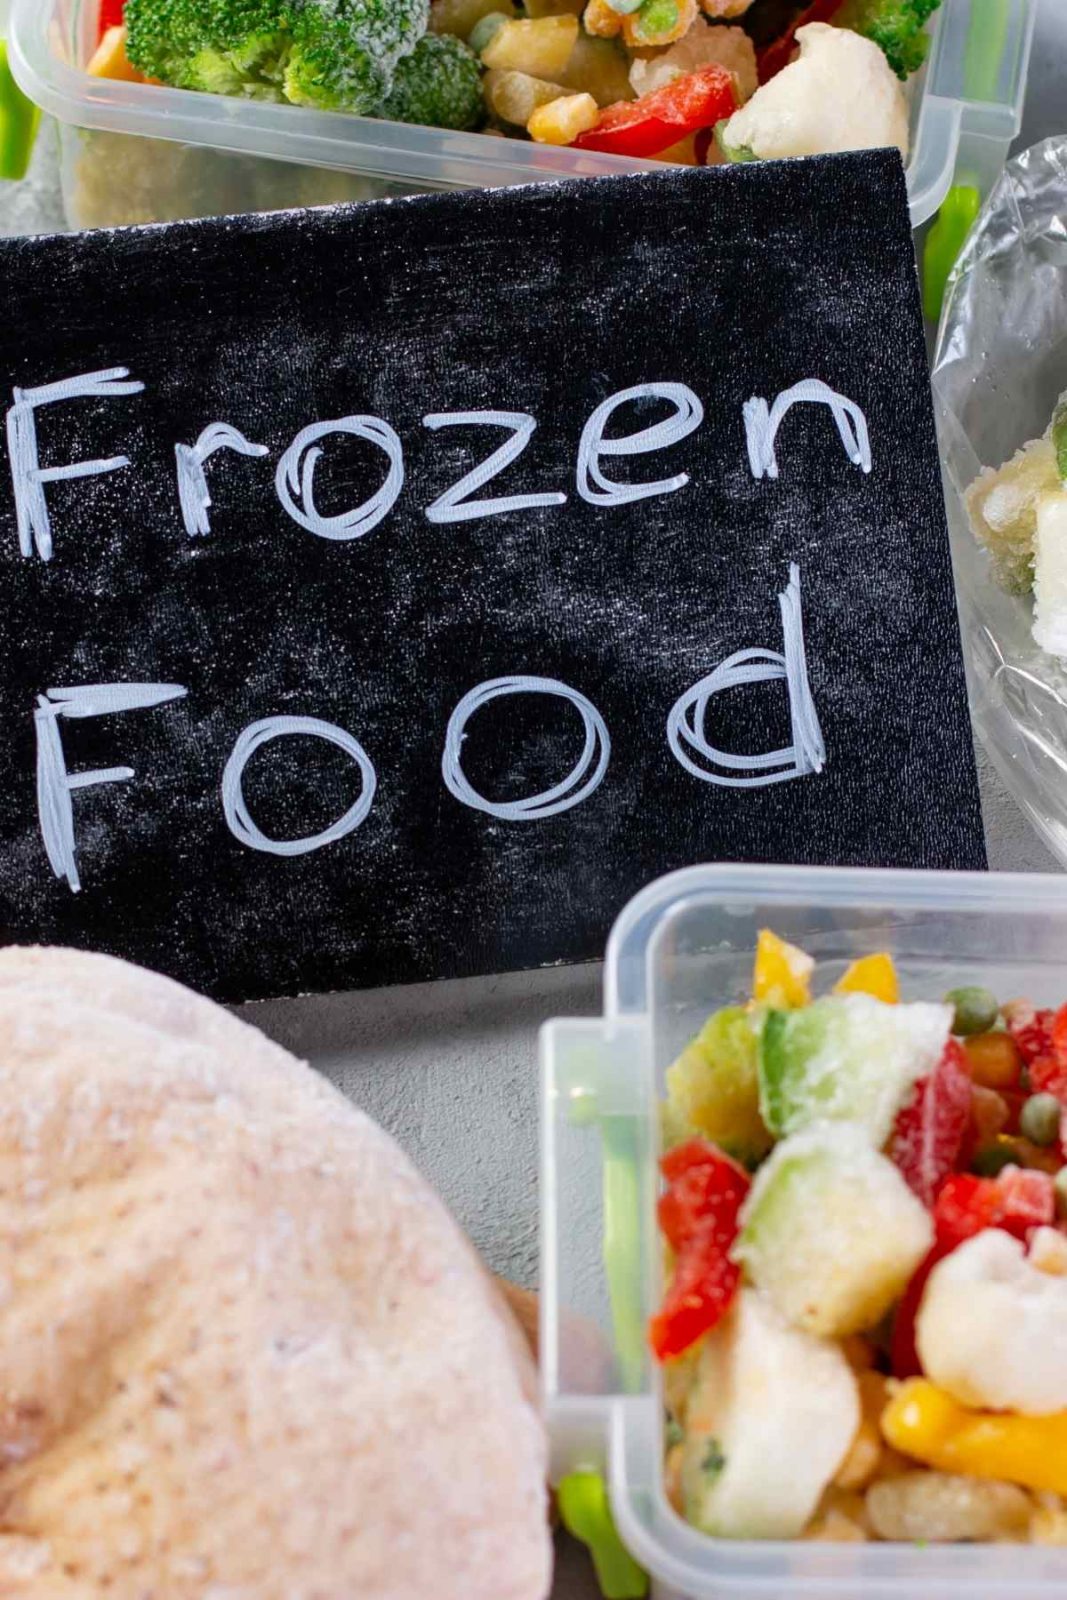 After you’ve taken the time to properly prepare food for the freezer, it’s equally as important to thaw it safely as well. The best place to thaw food is in the refrigerator because it keeps the food at a safe temperature that discourages bacteria.